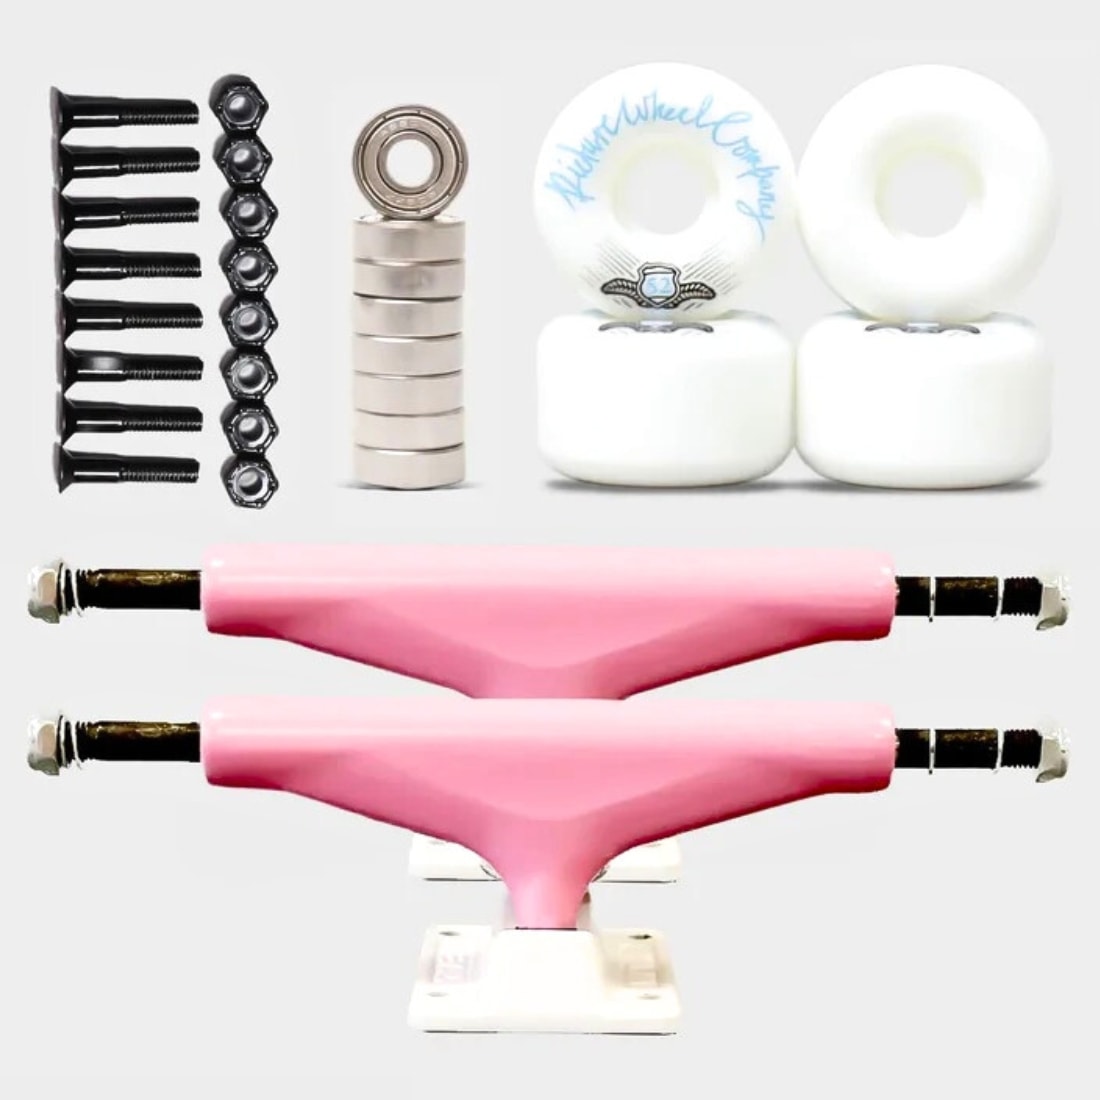 Picture Wheel Company 5.25 Trucks (Pair) With Wheels & Bearings Setup Undercarriage Kit - Pink/White - Skateboard Trucks by Picture Wheel Company 5.25 inch